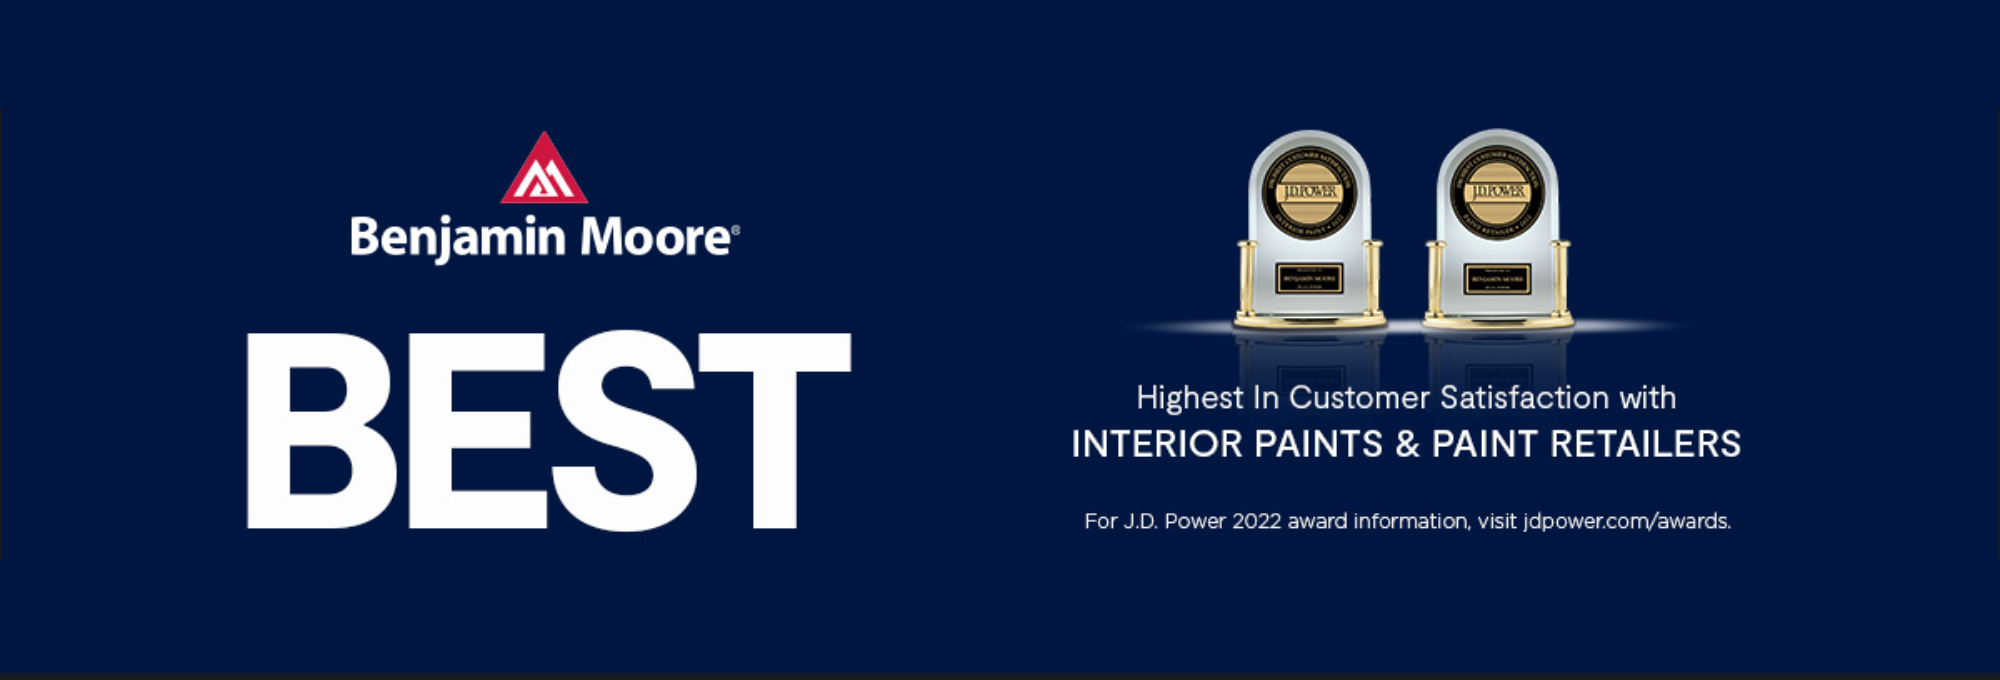 Benjamin-Moore-Paints-Color-Of-The-Year-Hero-Banner-2000x680